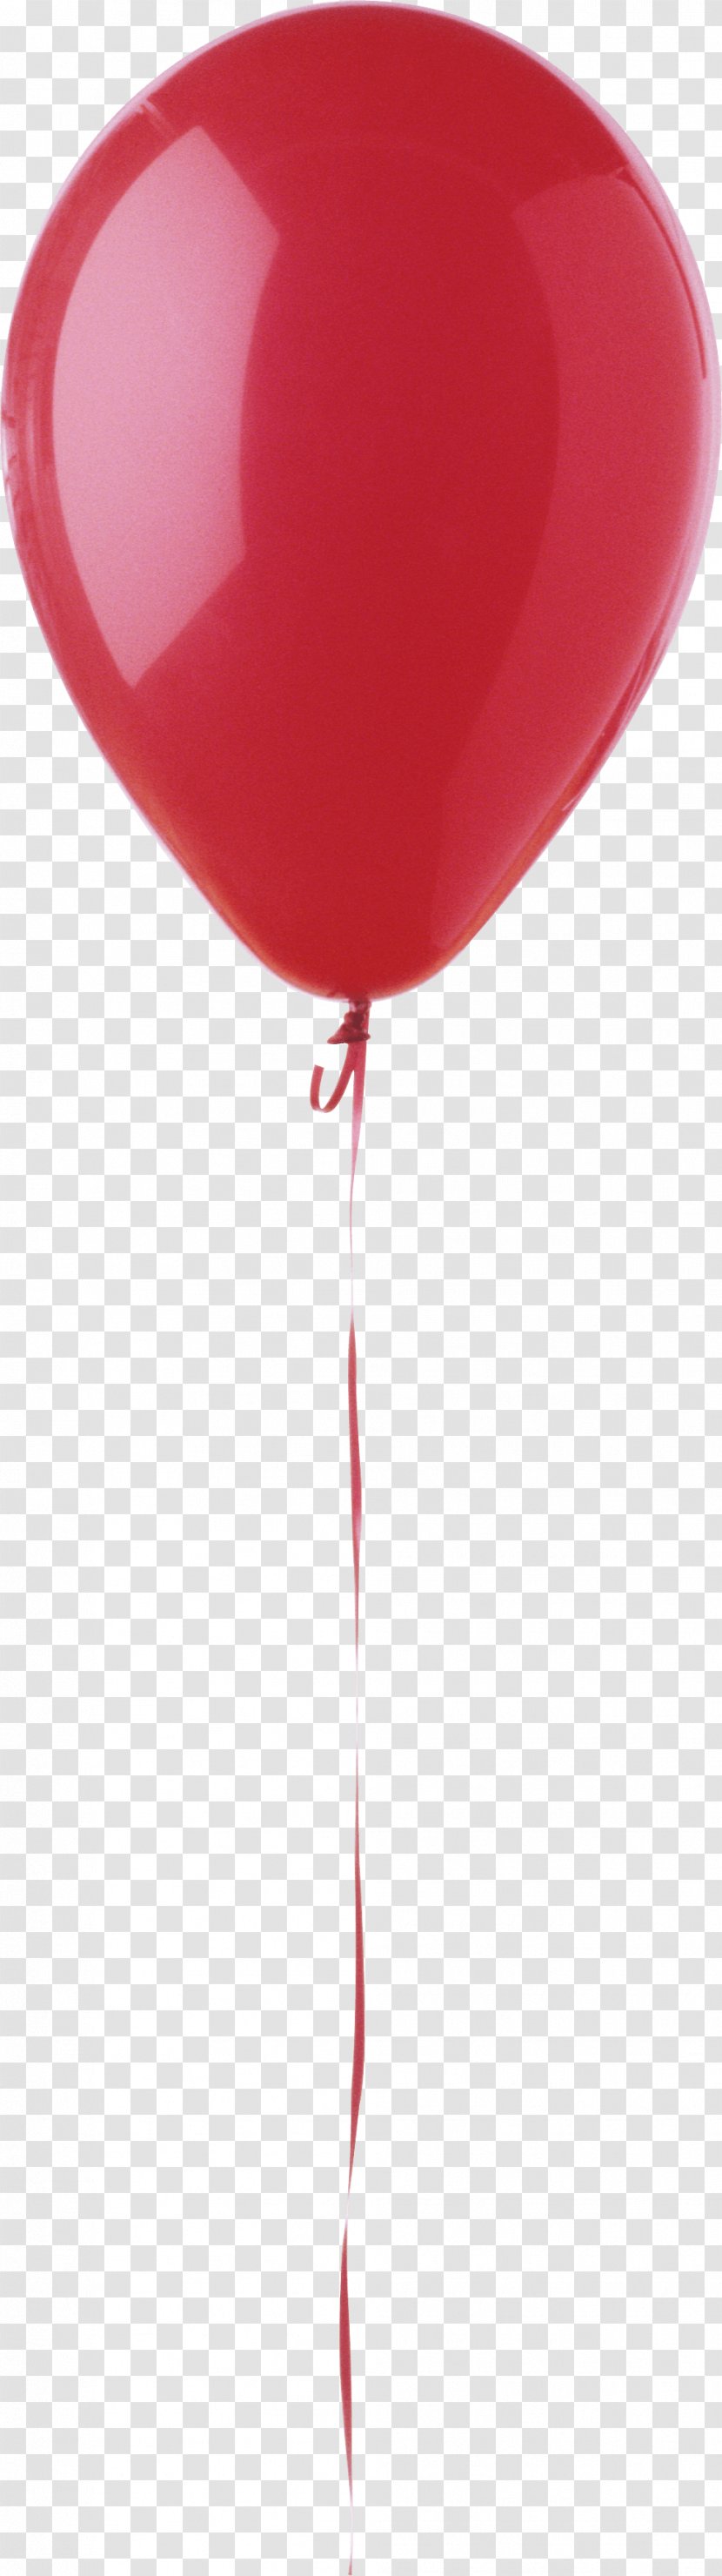 Toy Balloon - Party - Balloons Image Transparent PNG